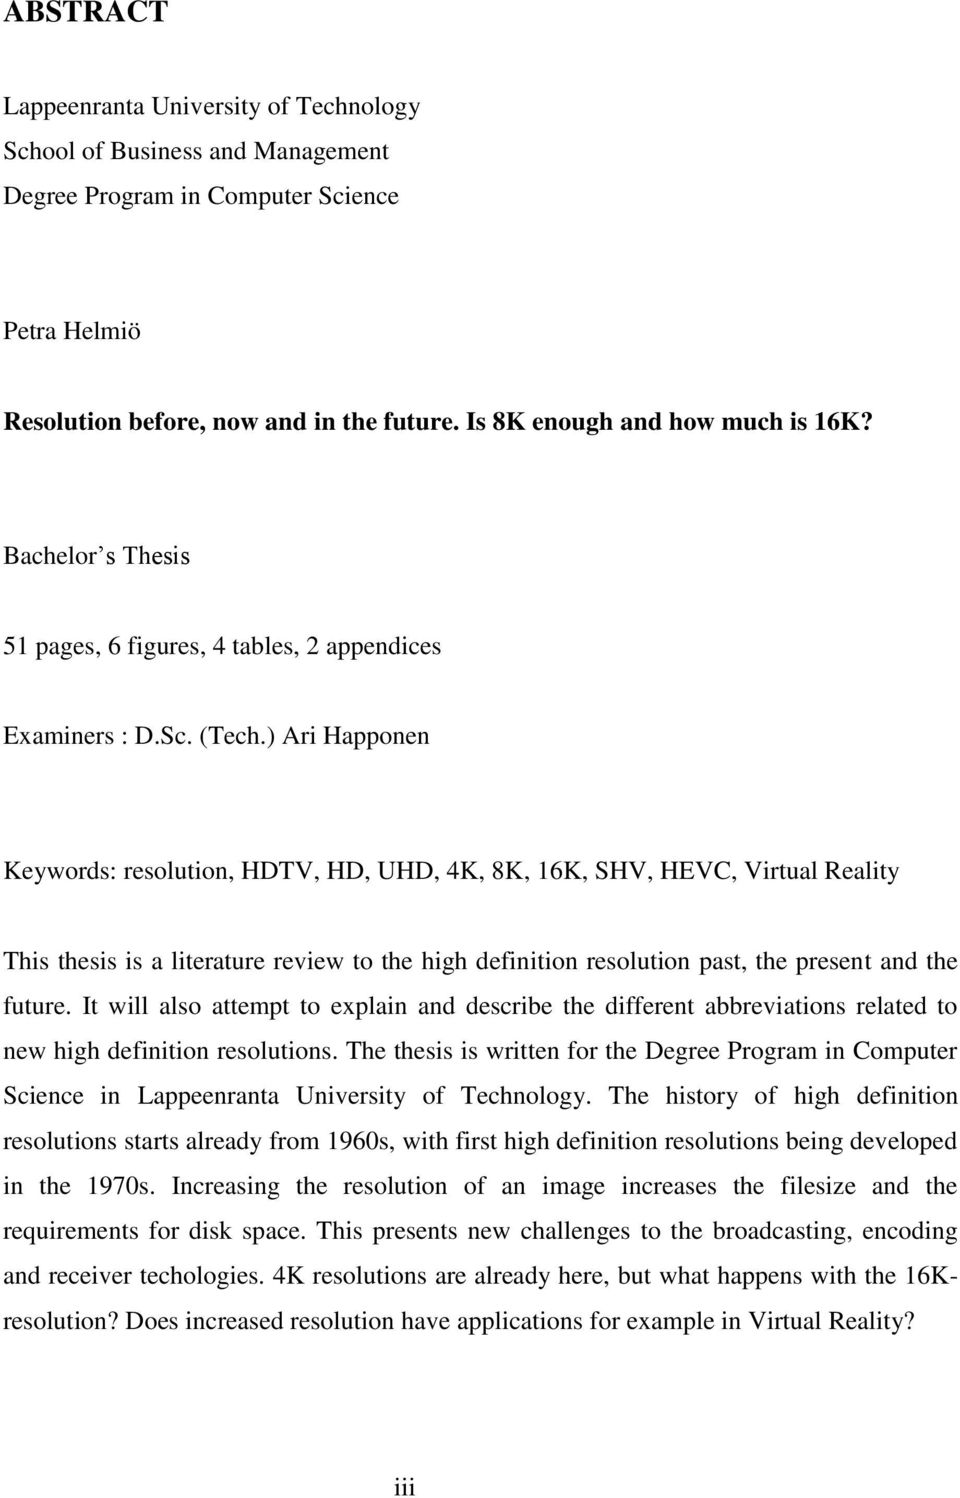 ) Ari Happonen Keywords: resolution, HDTV, HD, UHD, 4K, 8K, 16K, SHV, HEVC, Virtual Reality This thesis is a literature review to the high definition resolution past, the present and the future.